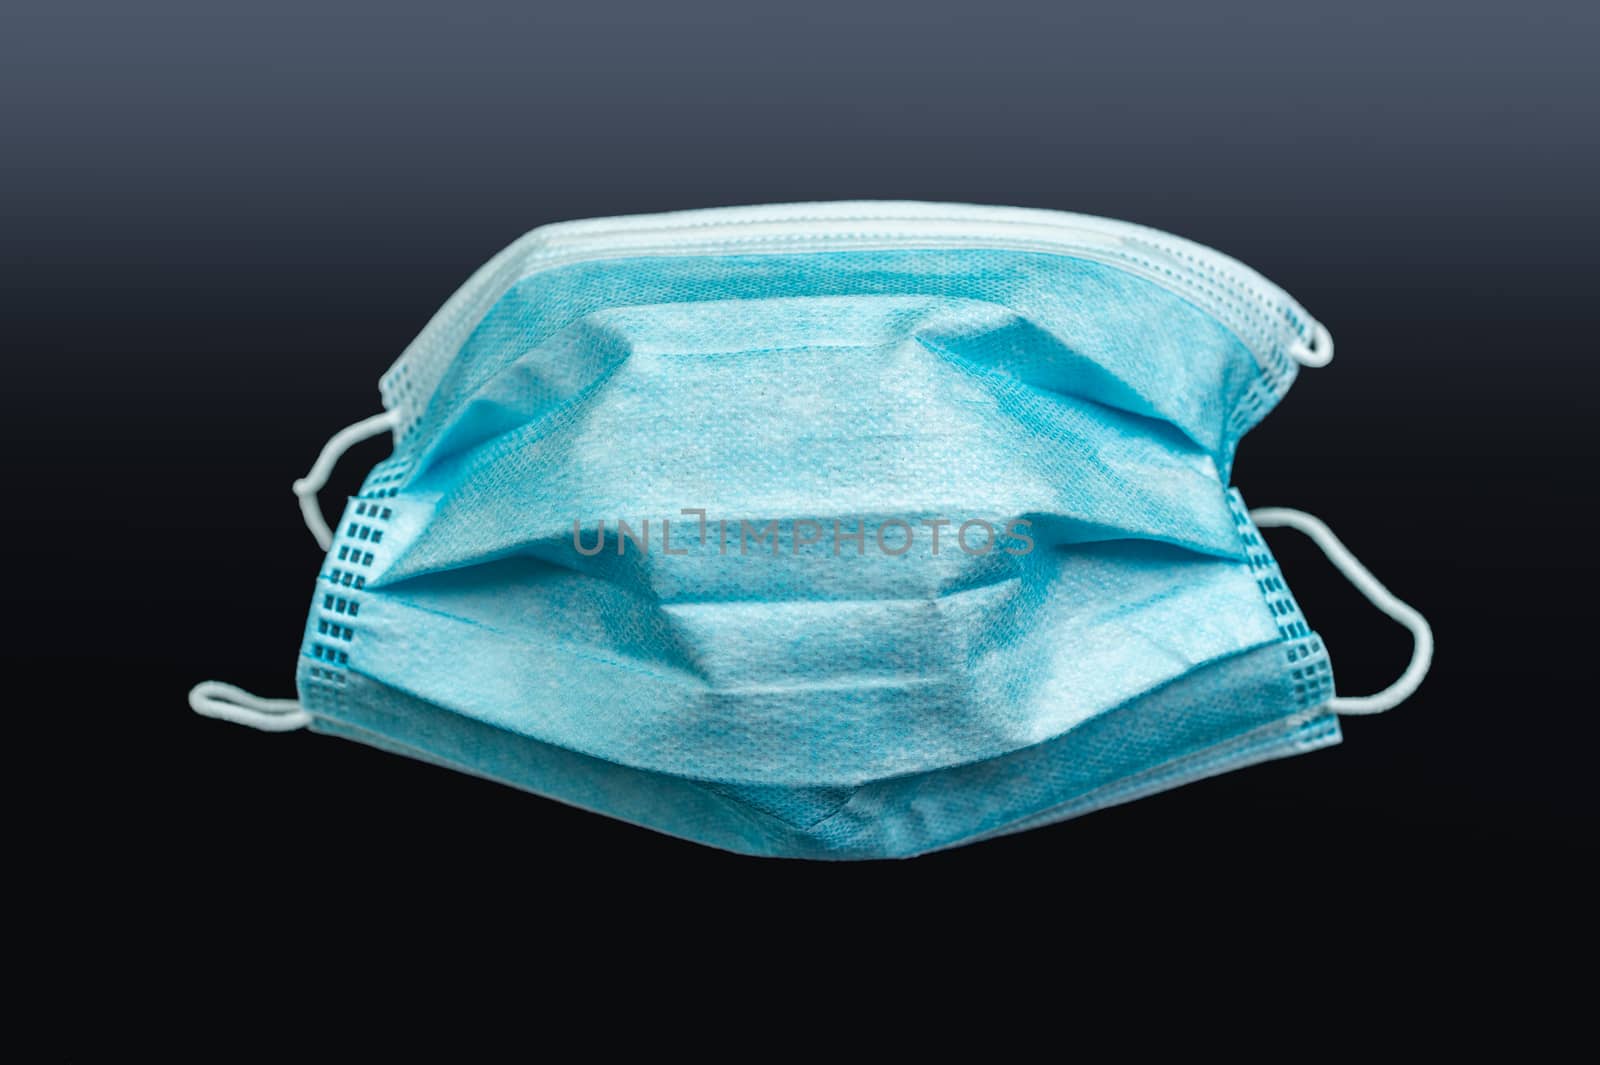 Surgical mask over dark background by mbruxelle